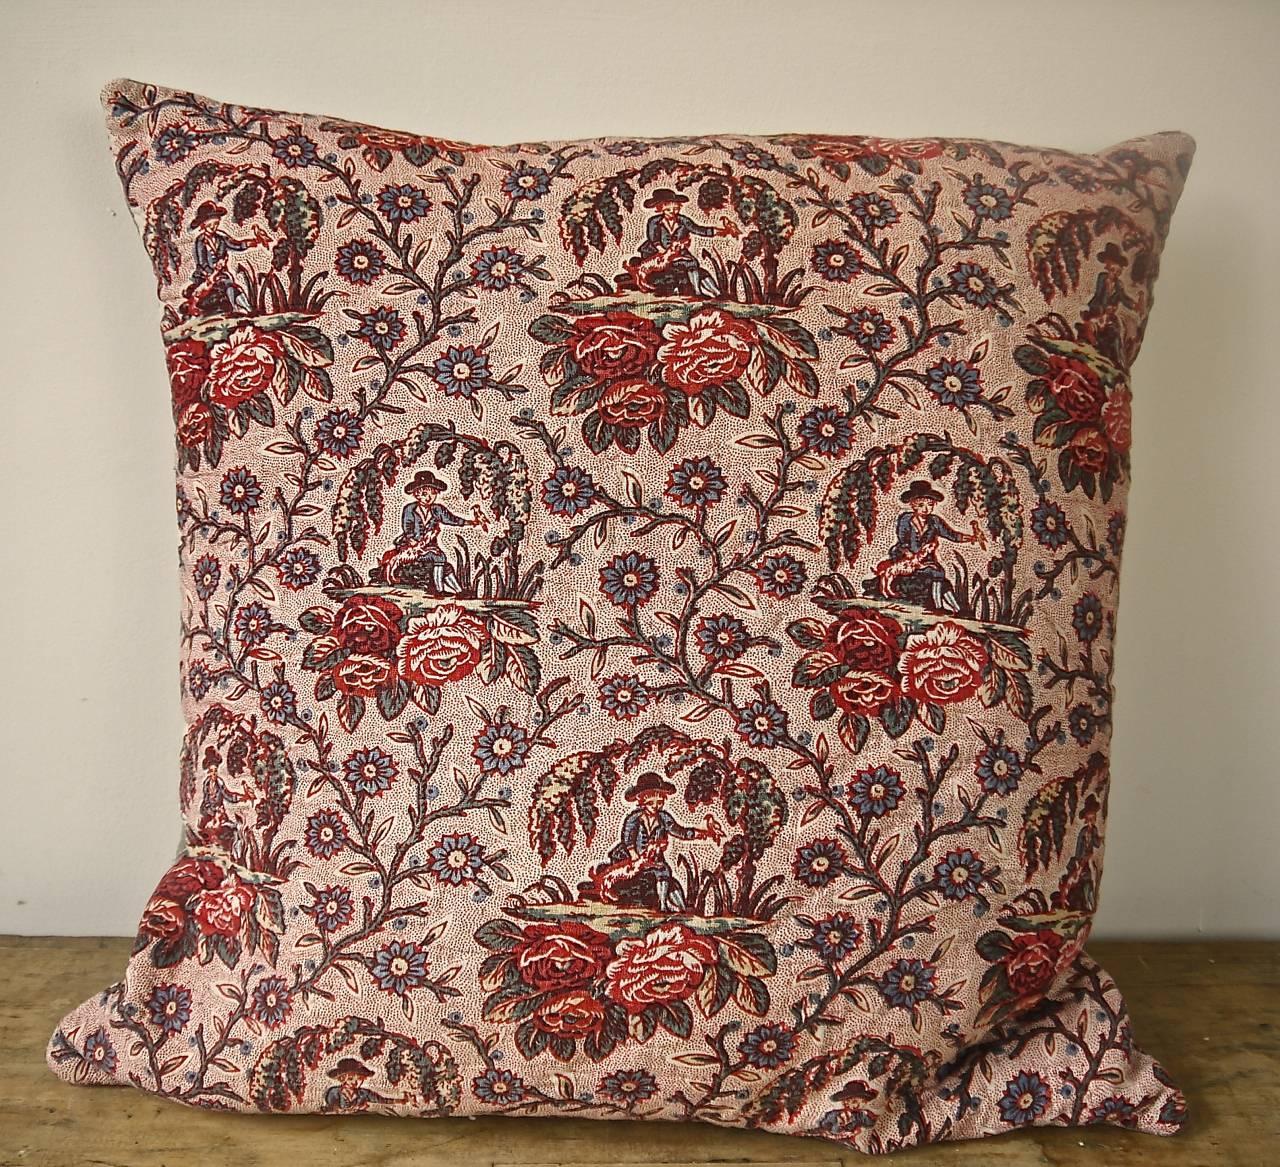 French late 18th century from Bolbec block printed cotton cushion with a charming print of a man in a blue suit and striped stockings with a bird on his hand and a dog by his side. He is surrounded by an arching tree and a clusters of flowers on a